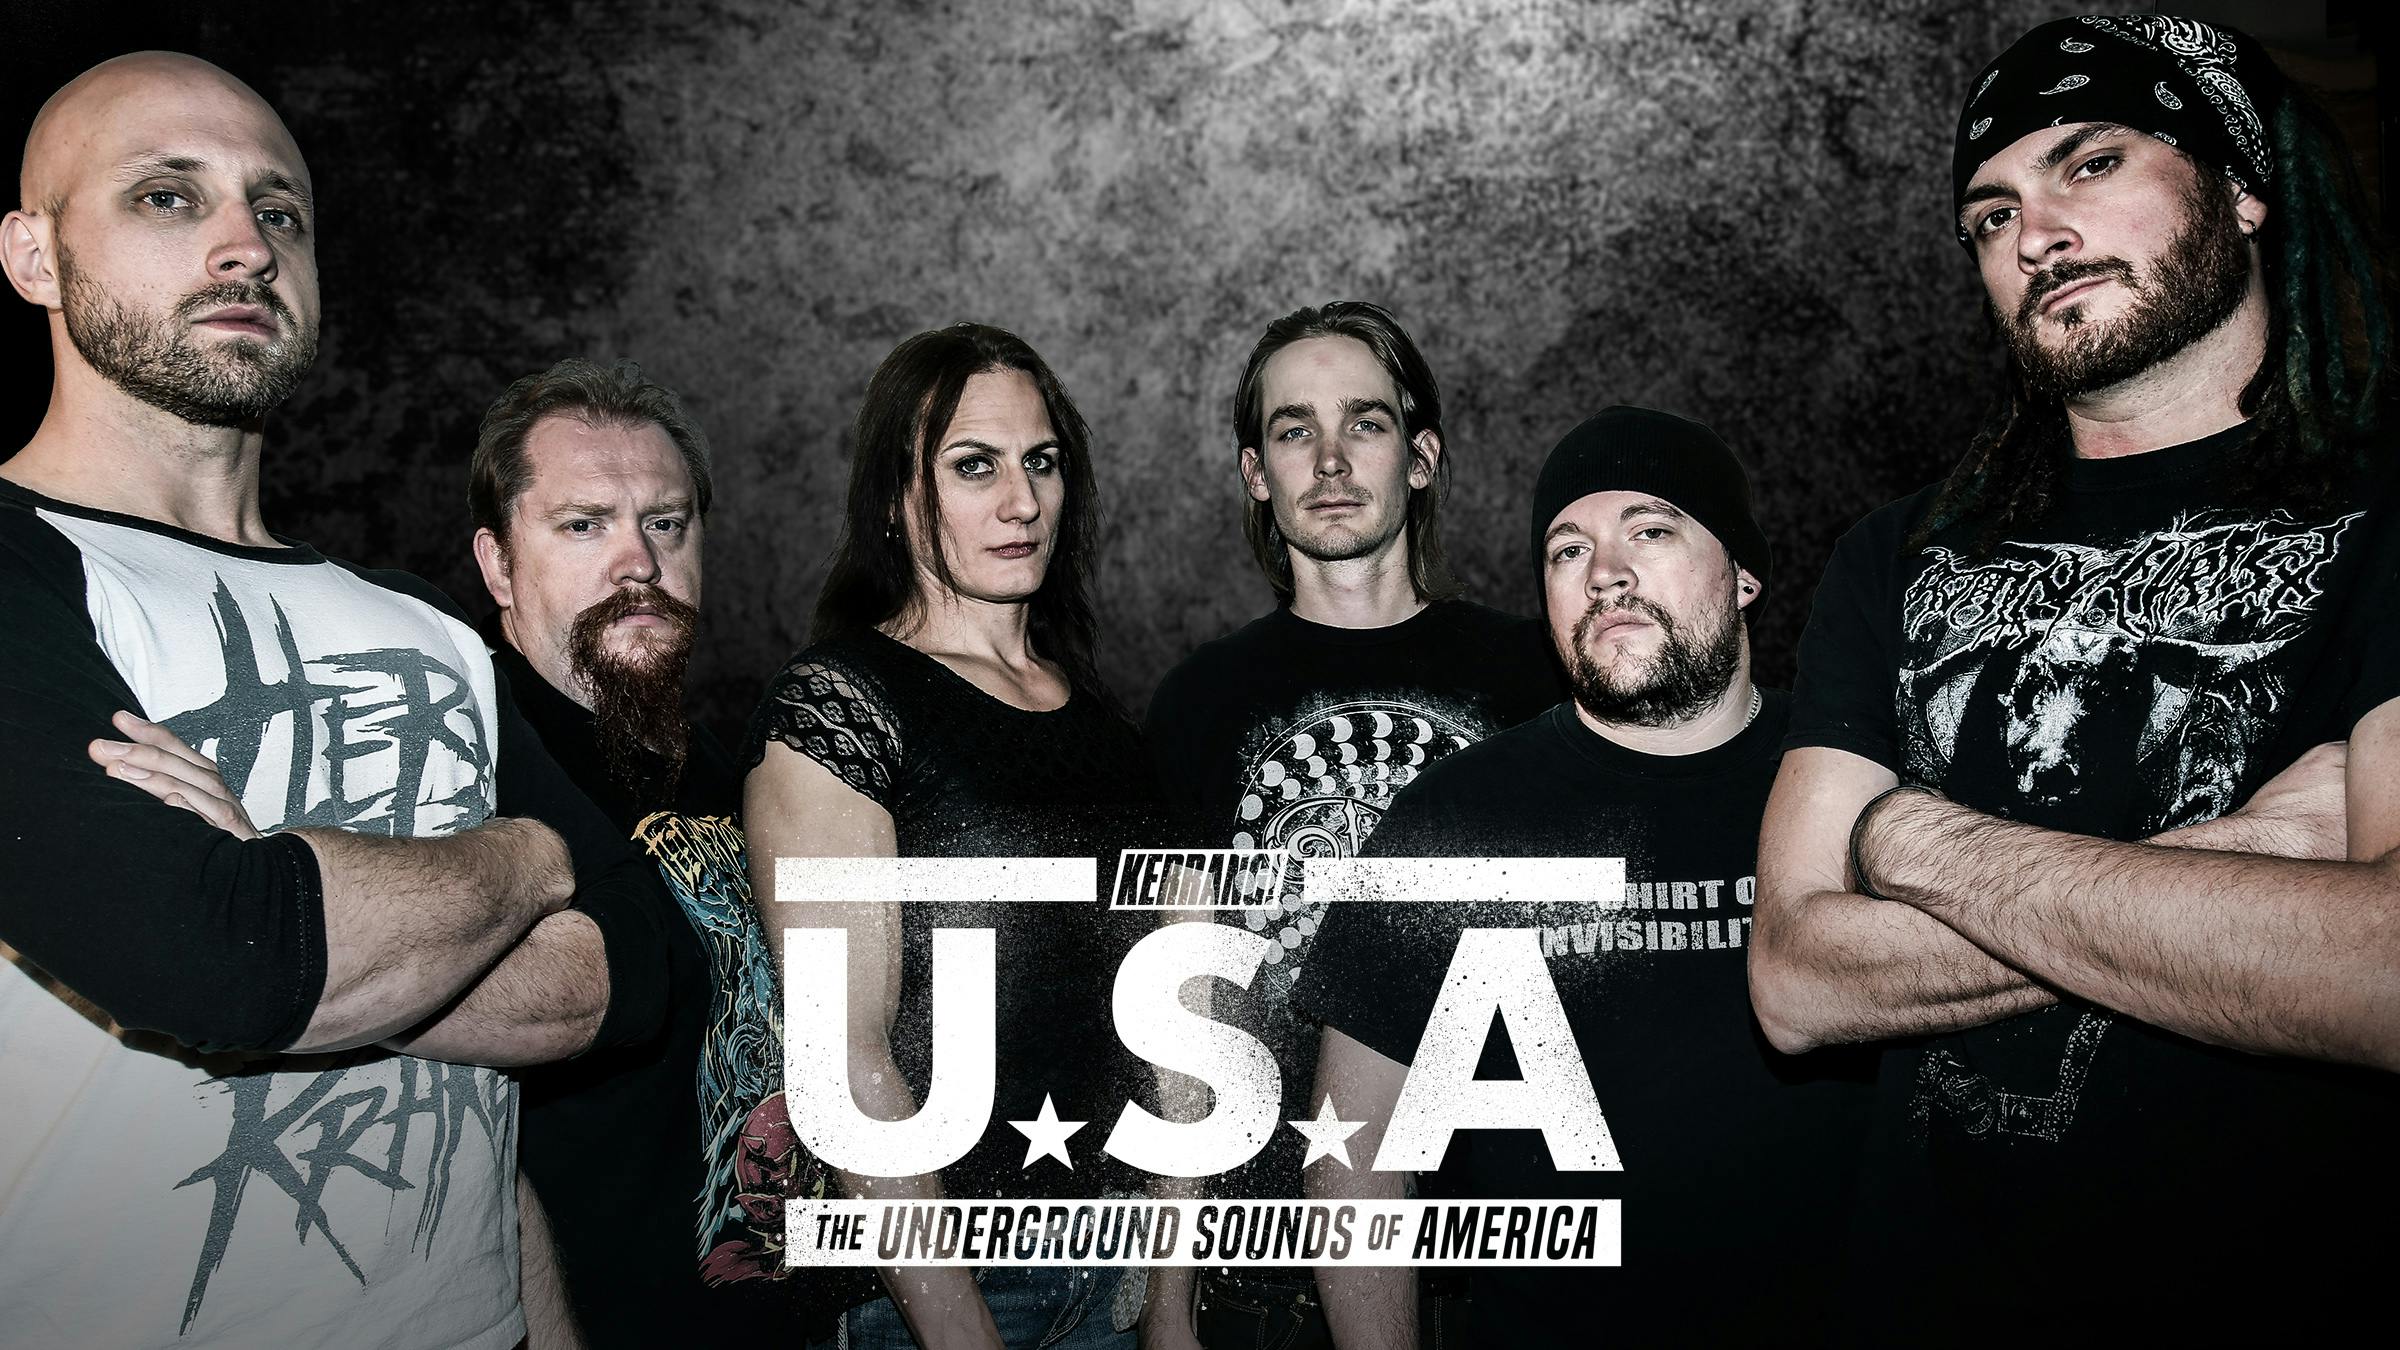 The Underground Sounds of America: Walking Corpse Syndrome